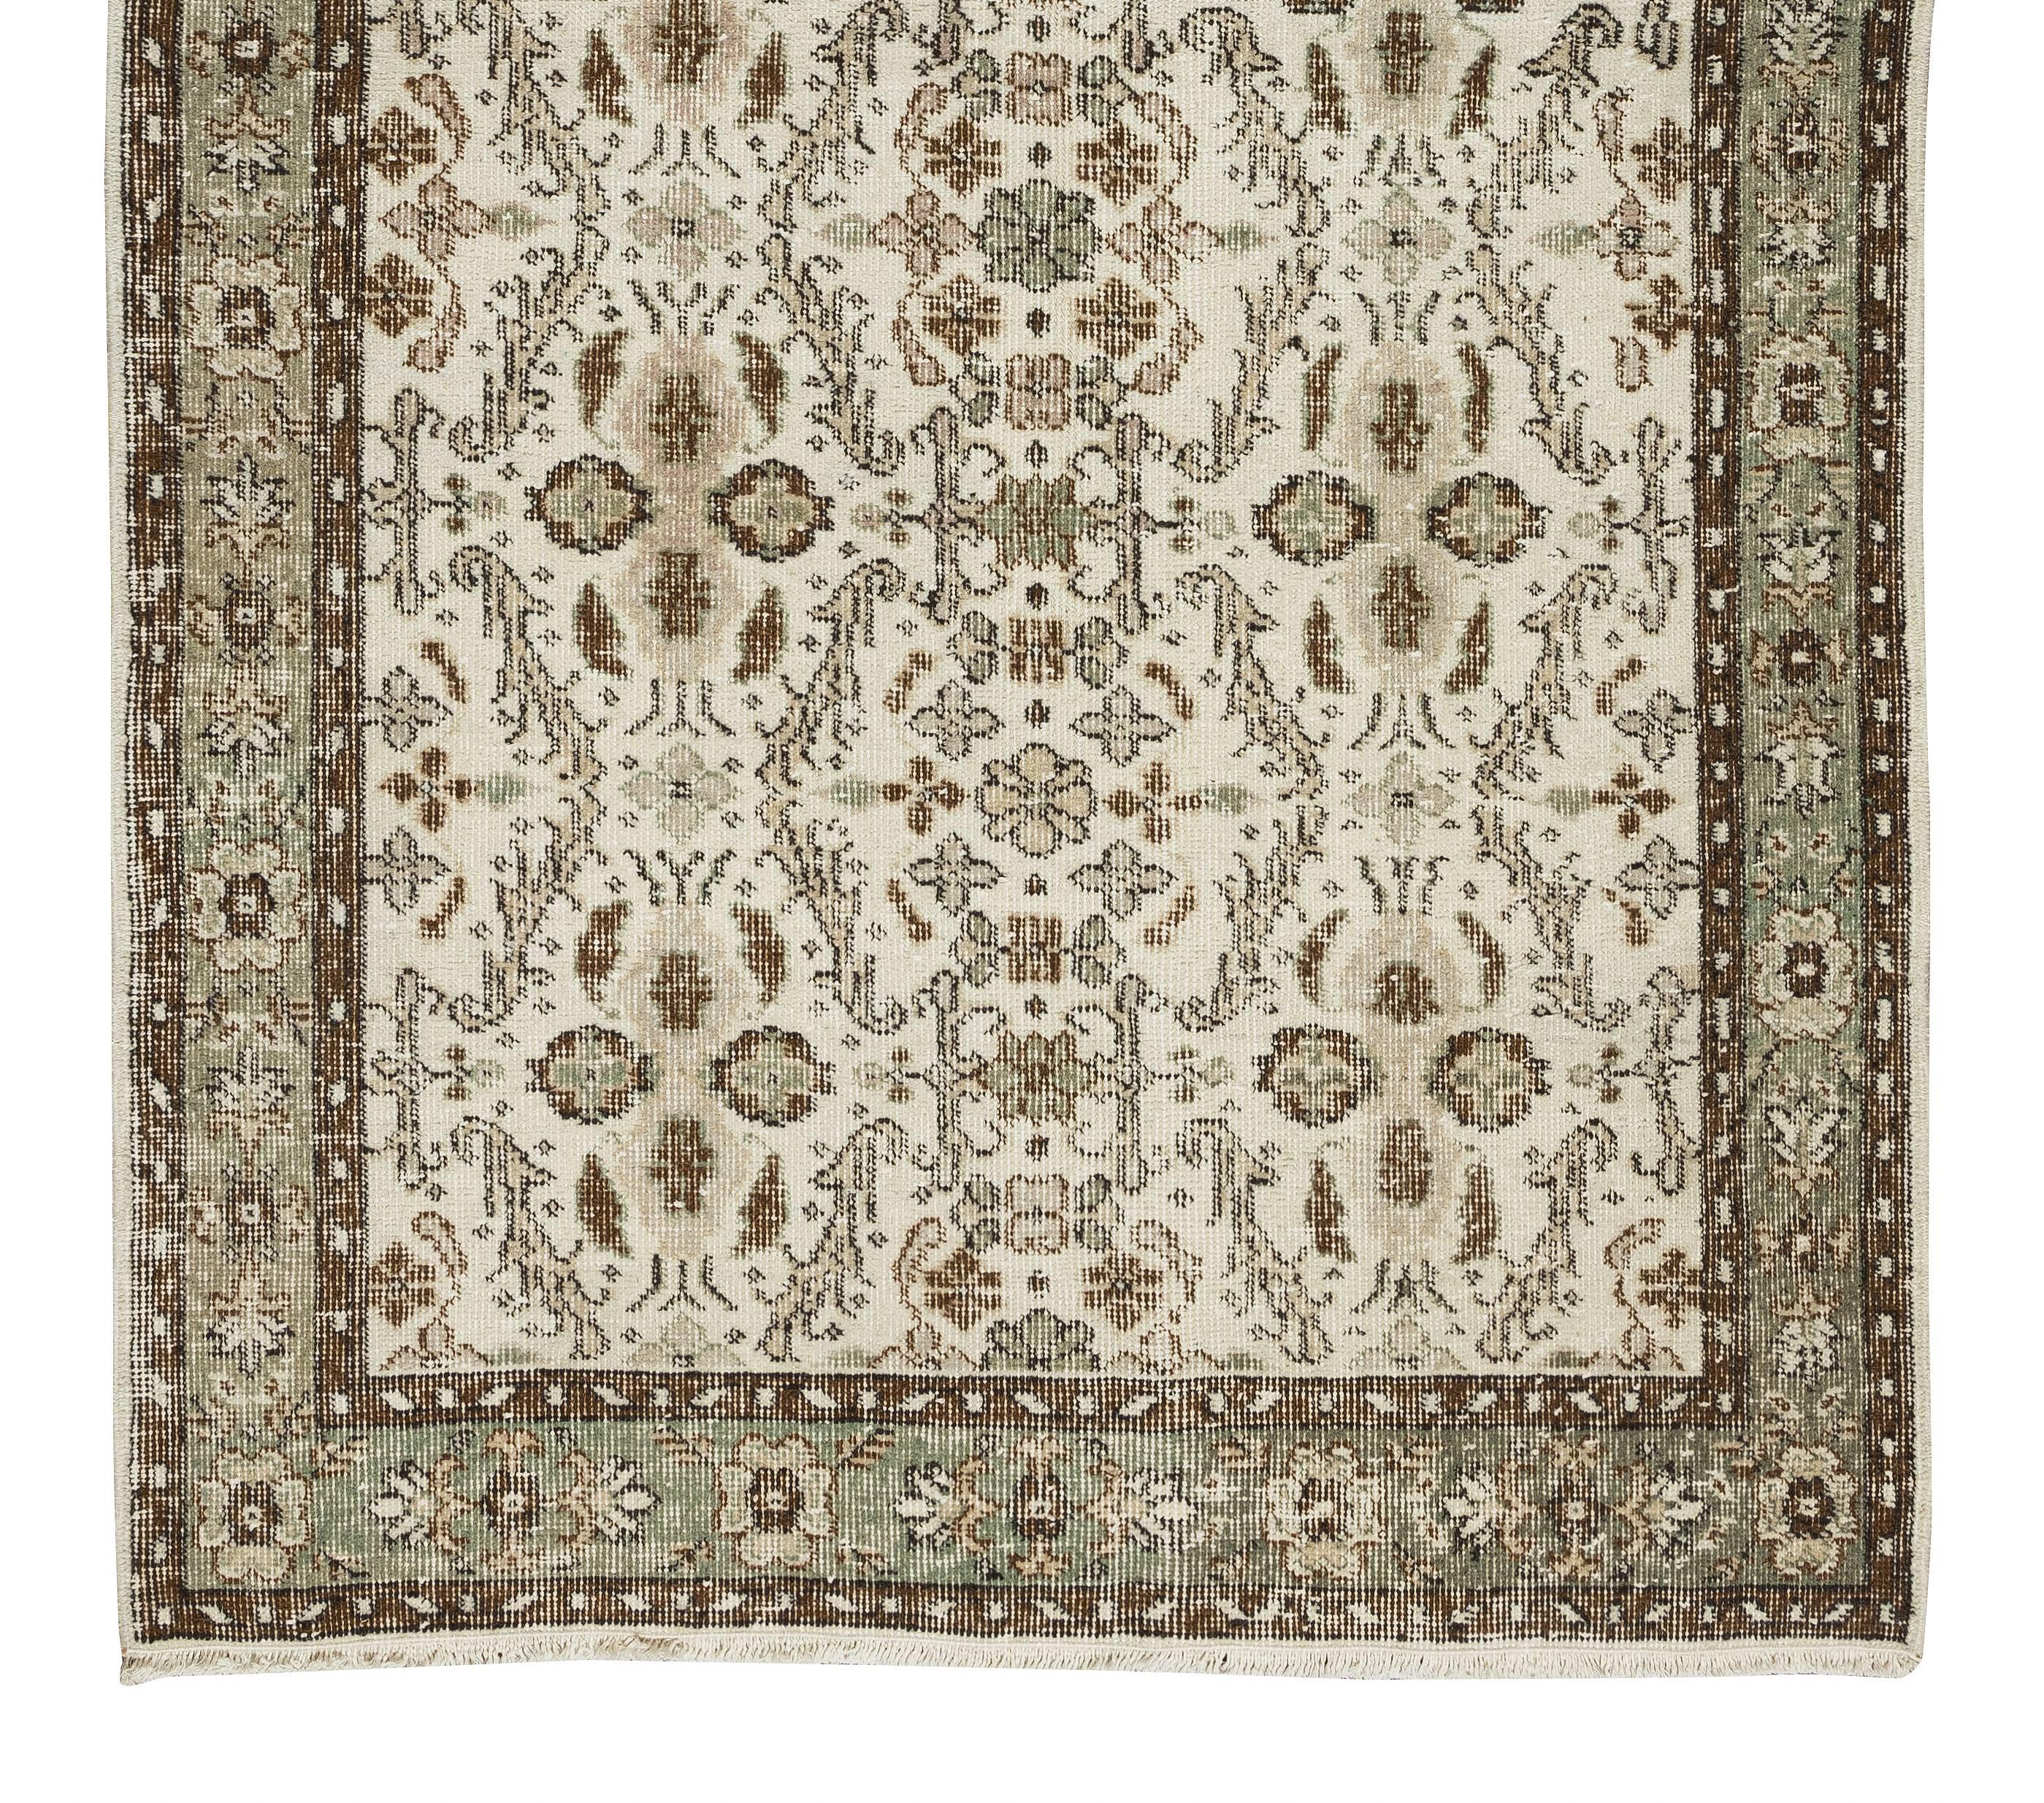 Vintage Handmade Turkish Accent Rug, Floral Patterned Floor Covering In Good Condition For Sale In Philadelphia, PA